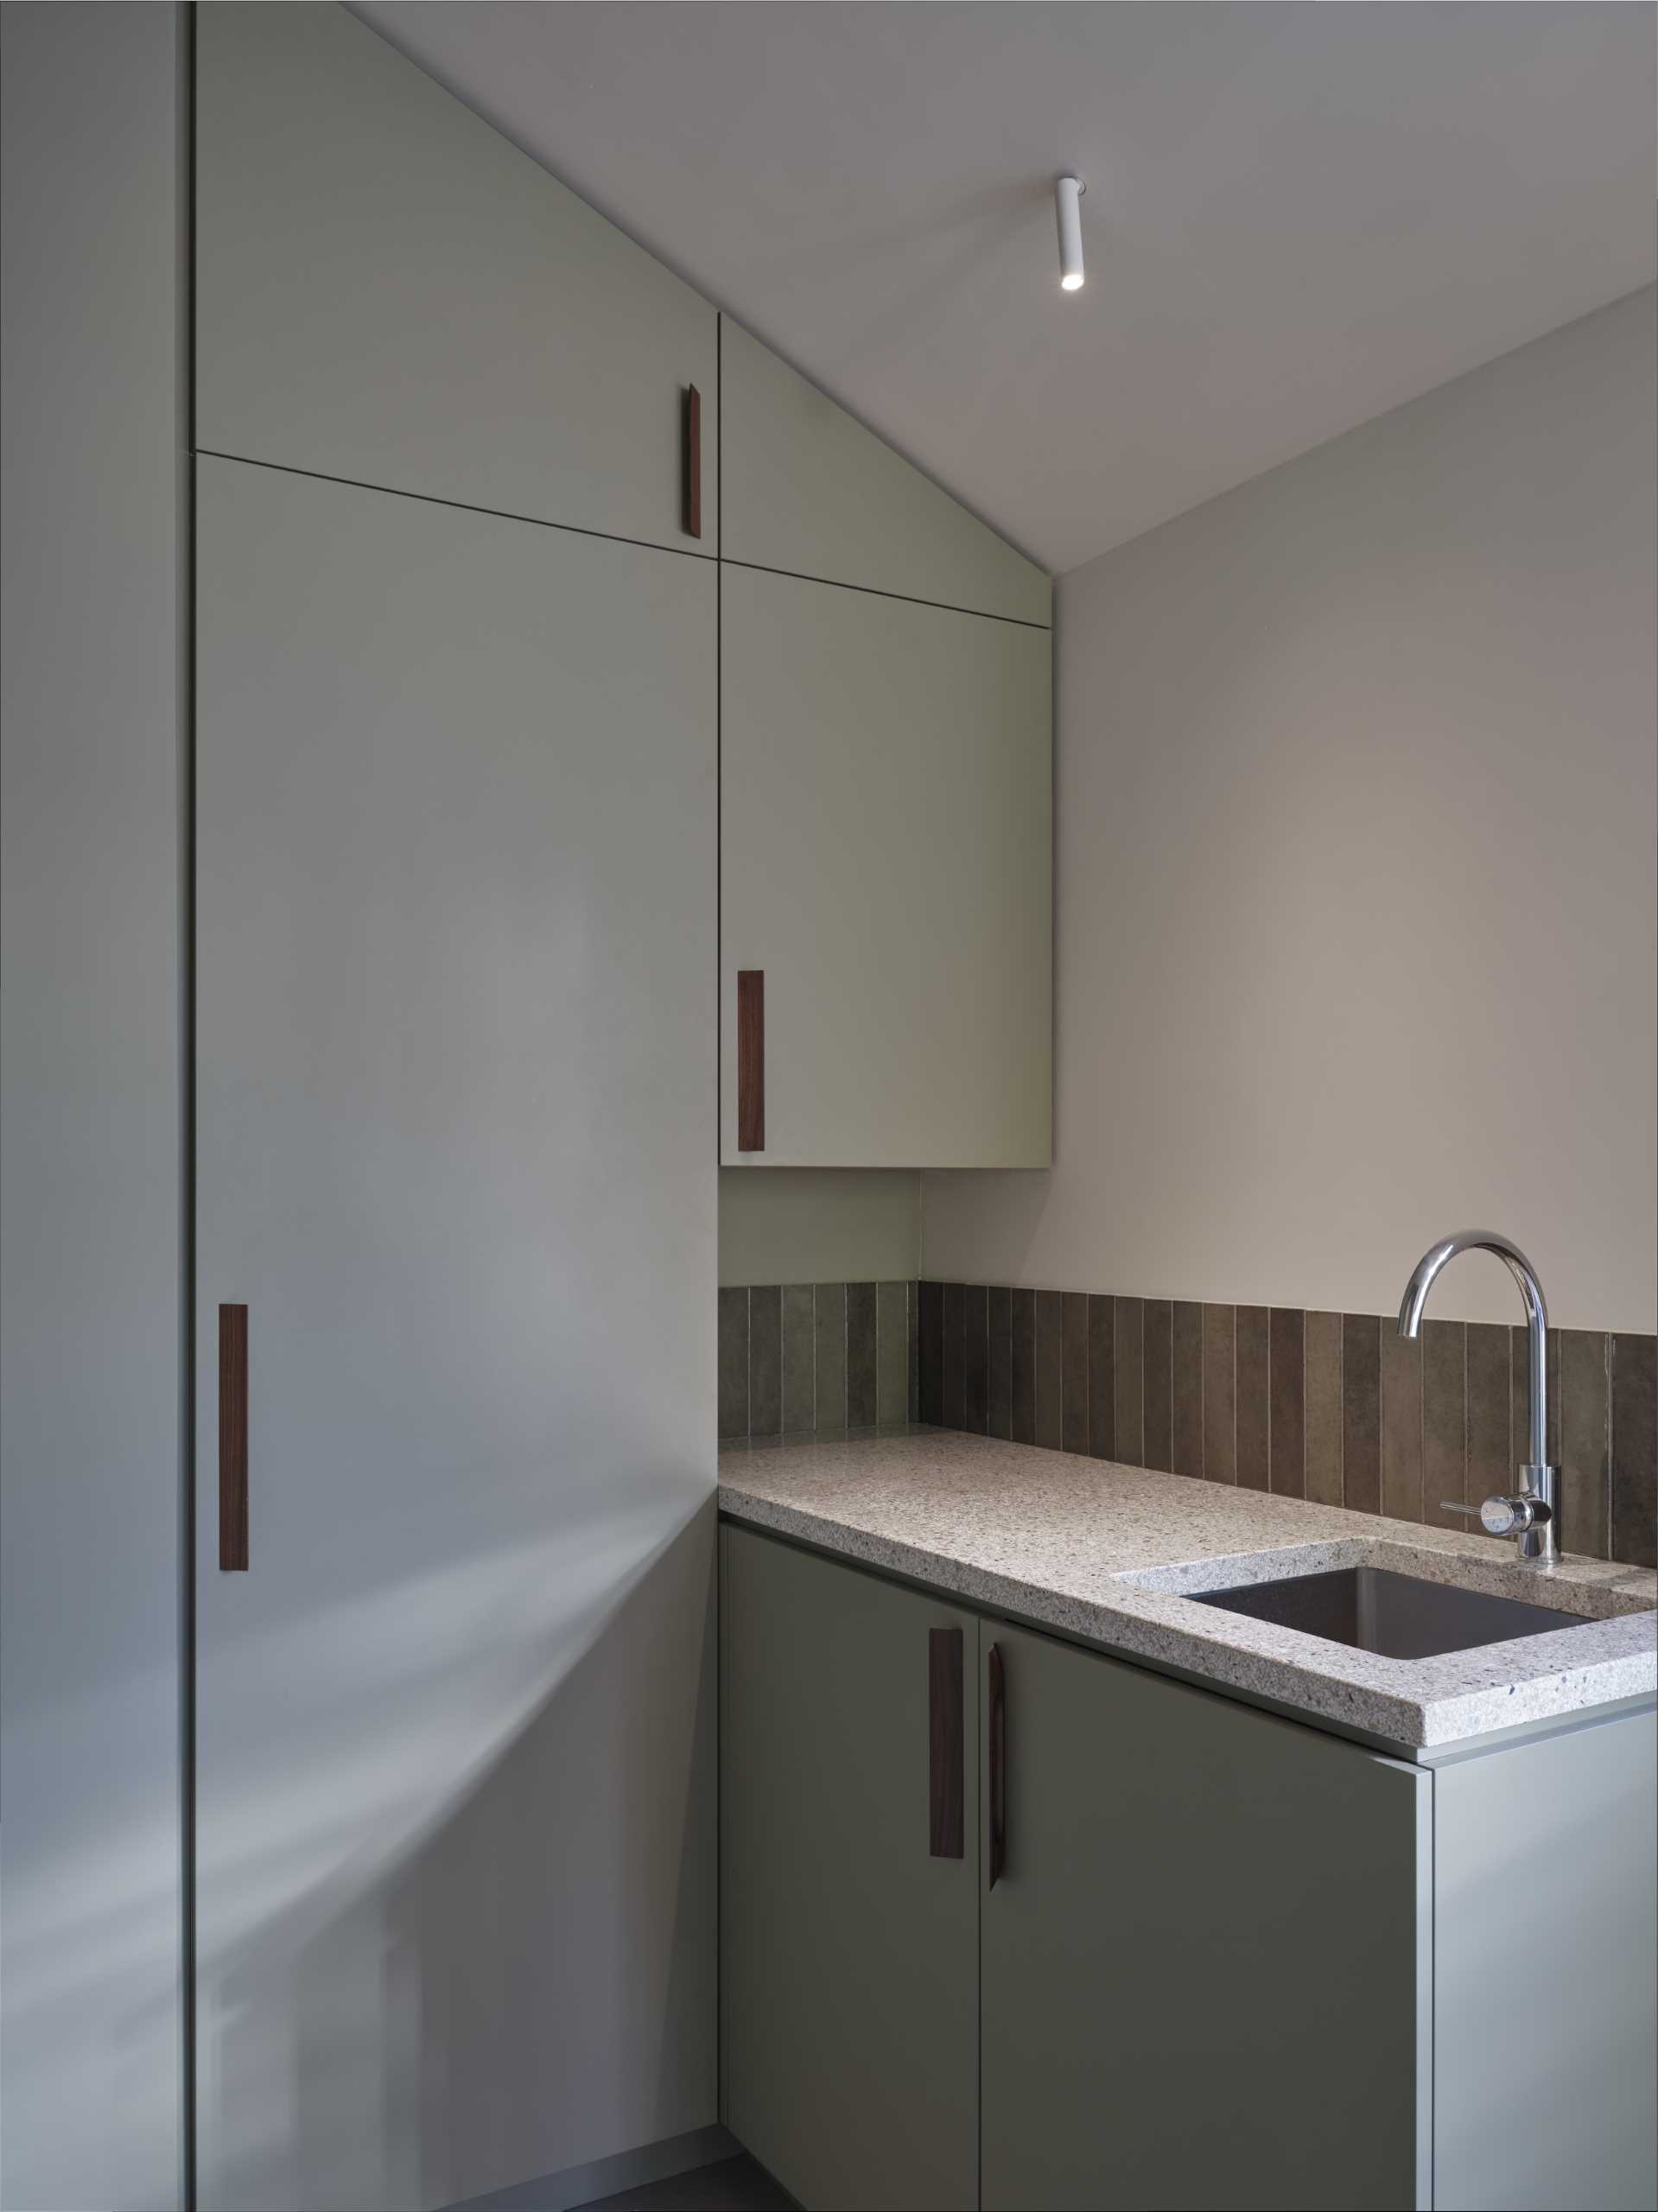 A modern laundry room with terr،o countertop and sink, and matte green cabinets.